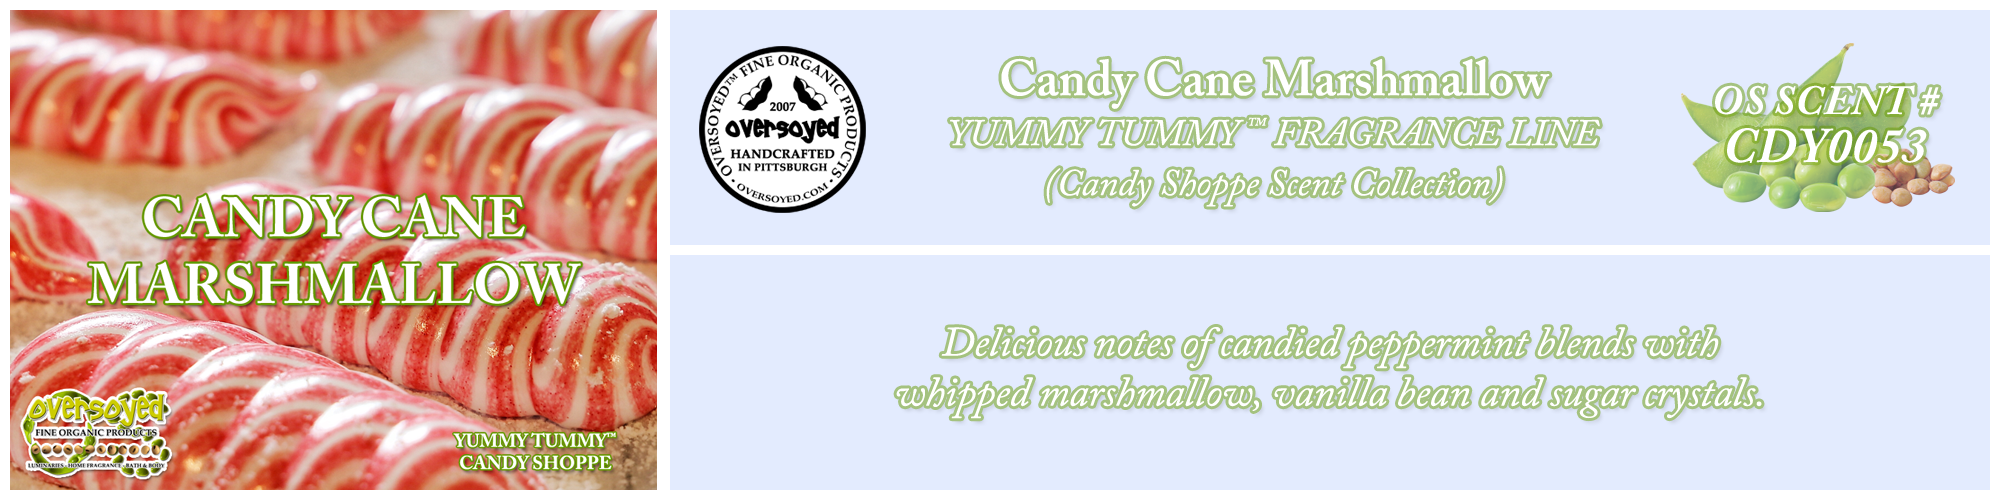 Candy Cane Marshmallow Handcrafted Products Collection